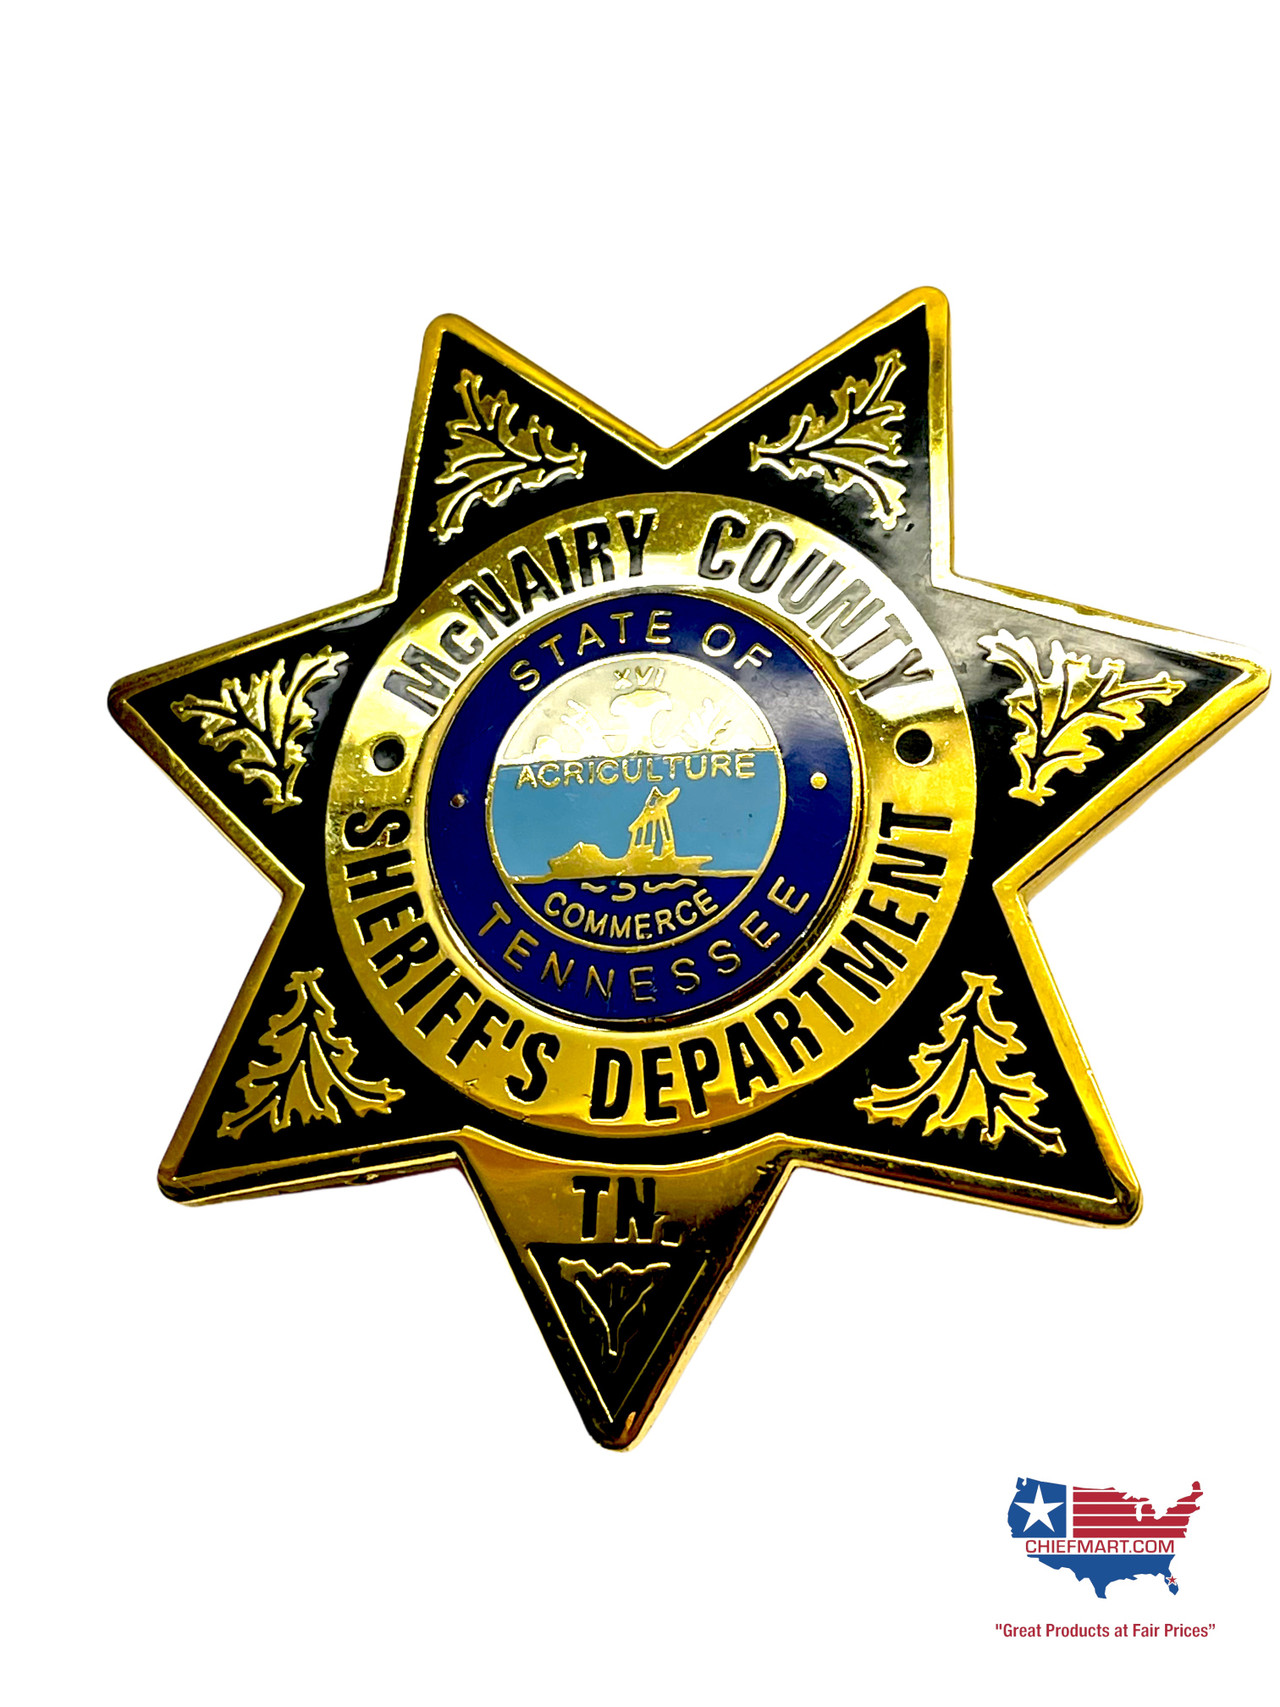 McNAIRY COUNTY SHERIFF’S DEPARTMENT TN STAR BADGE